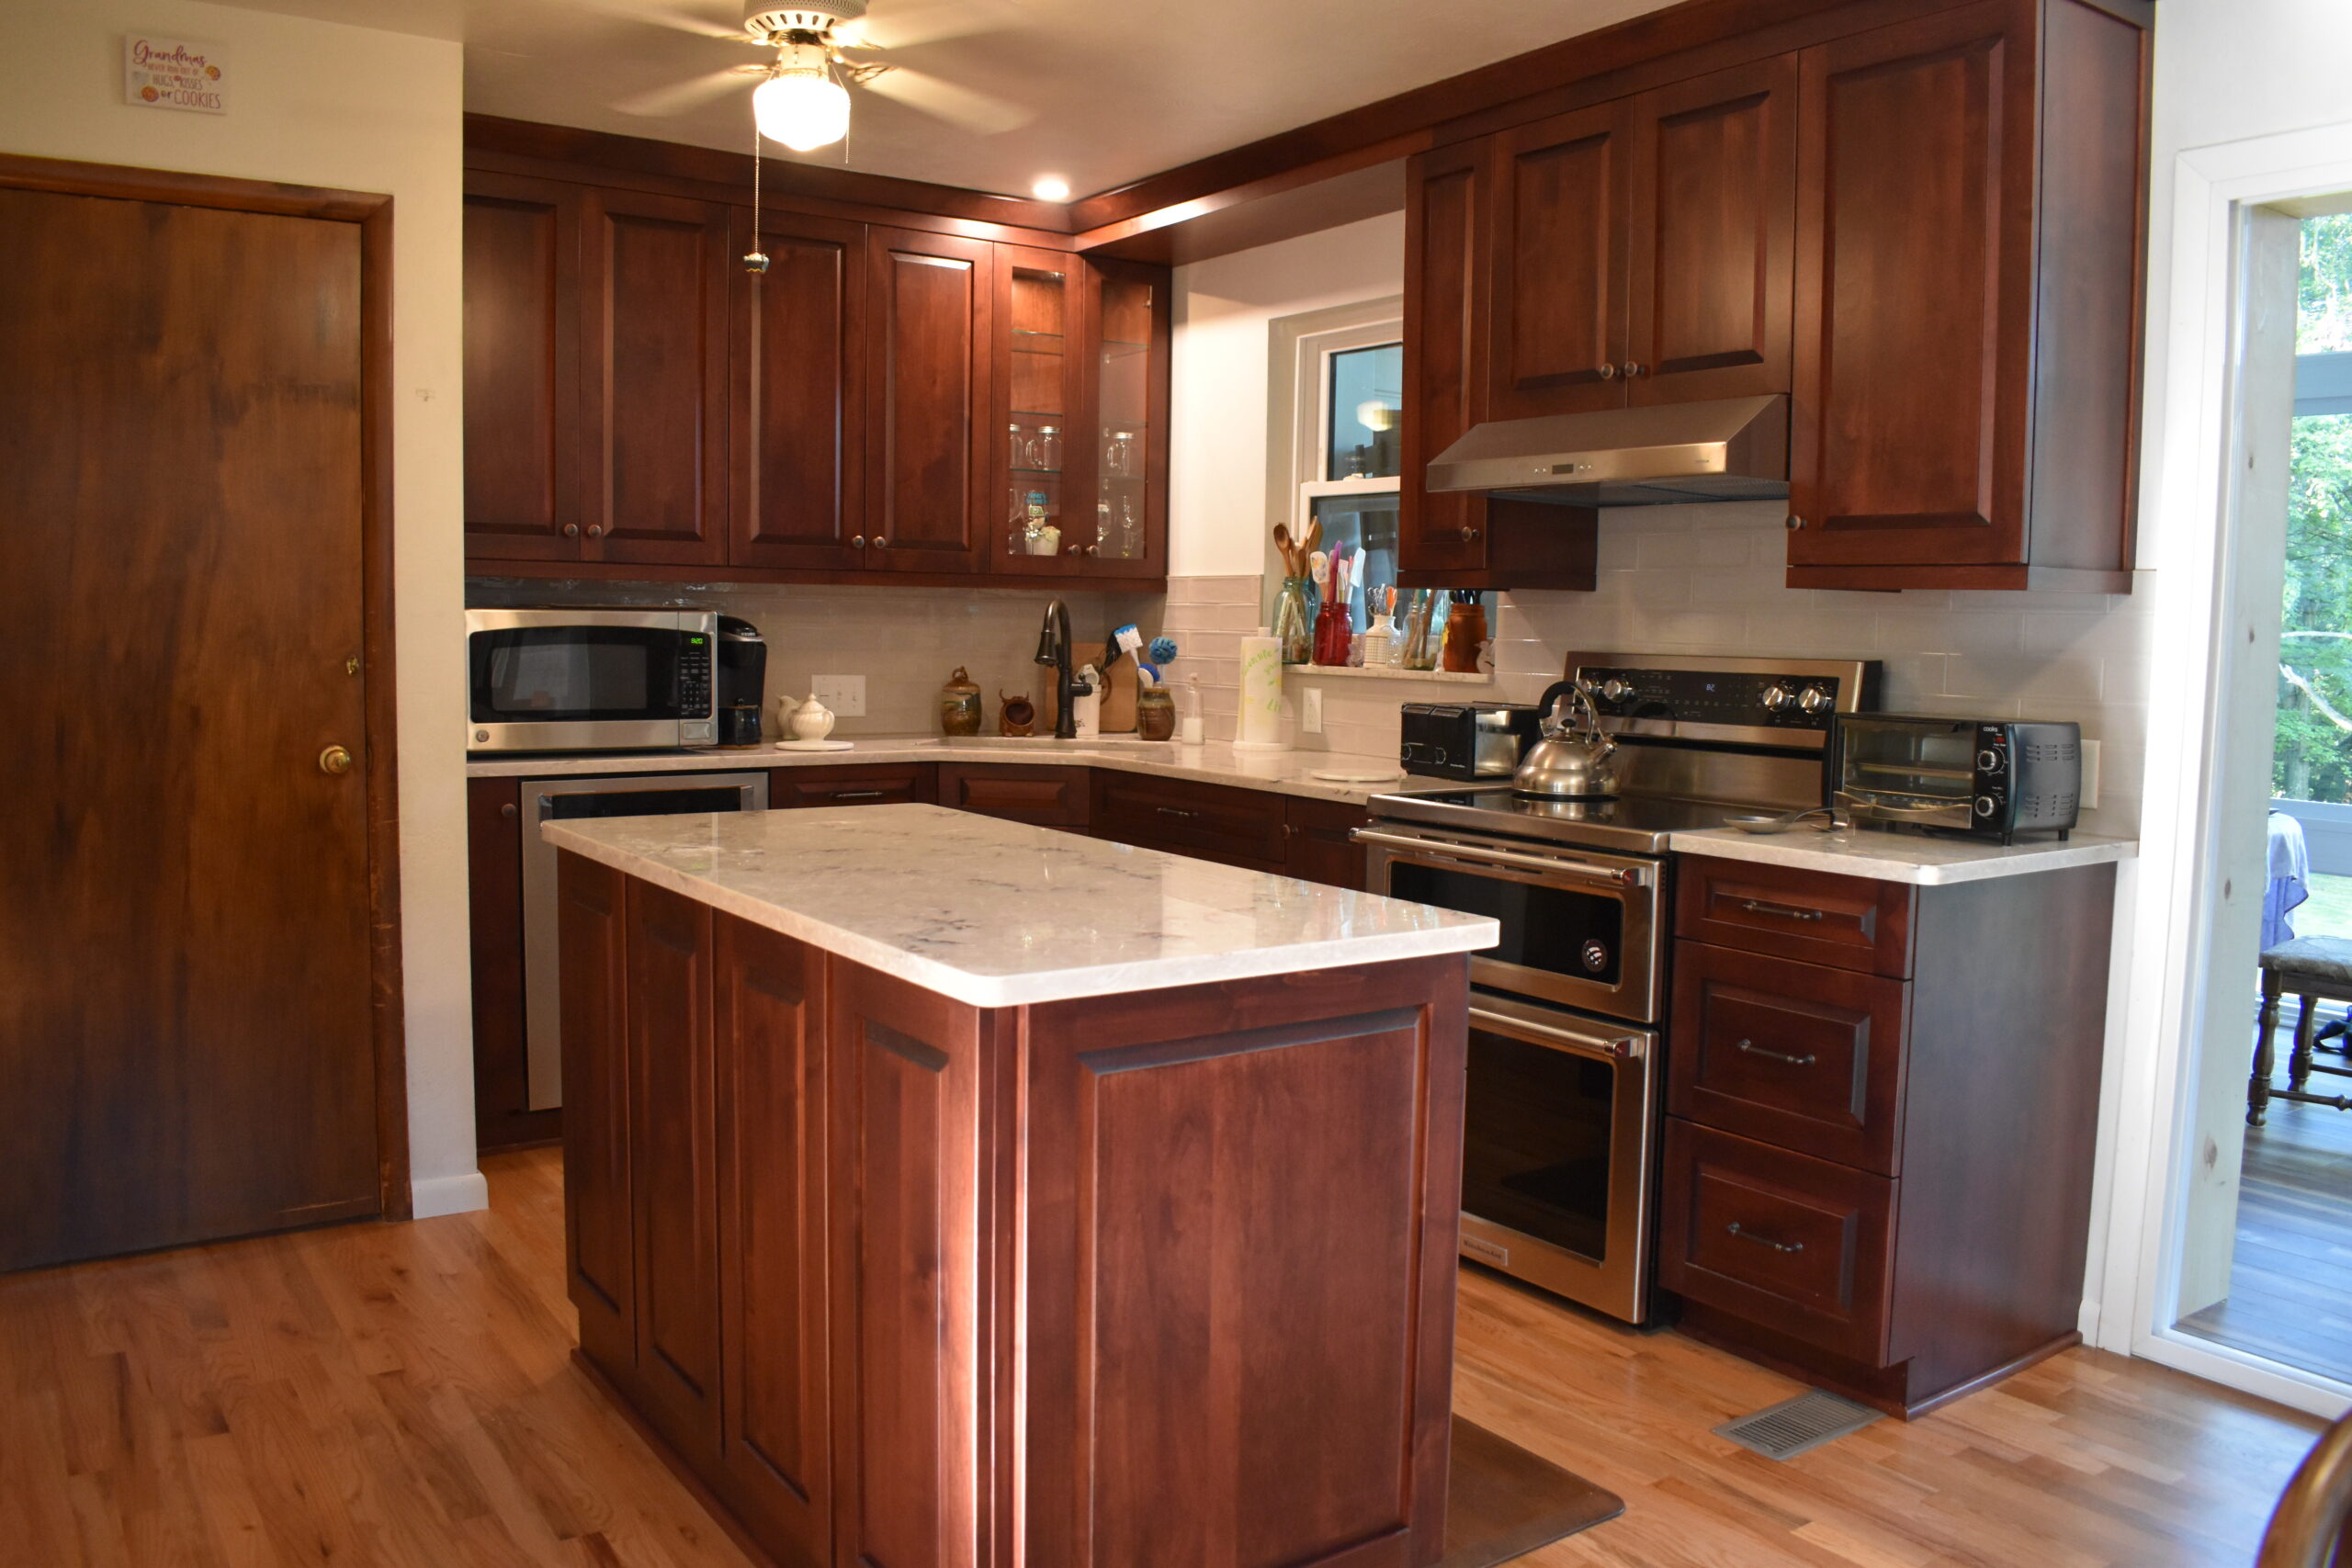 Classic brown wooden island with white marble countertop, brown cabinet storage, white marble counter